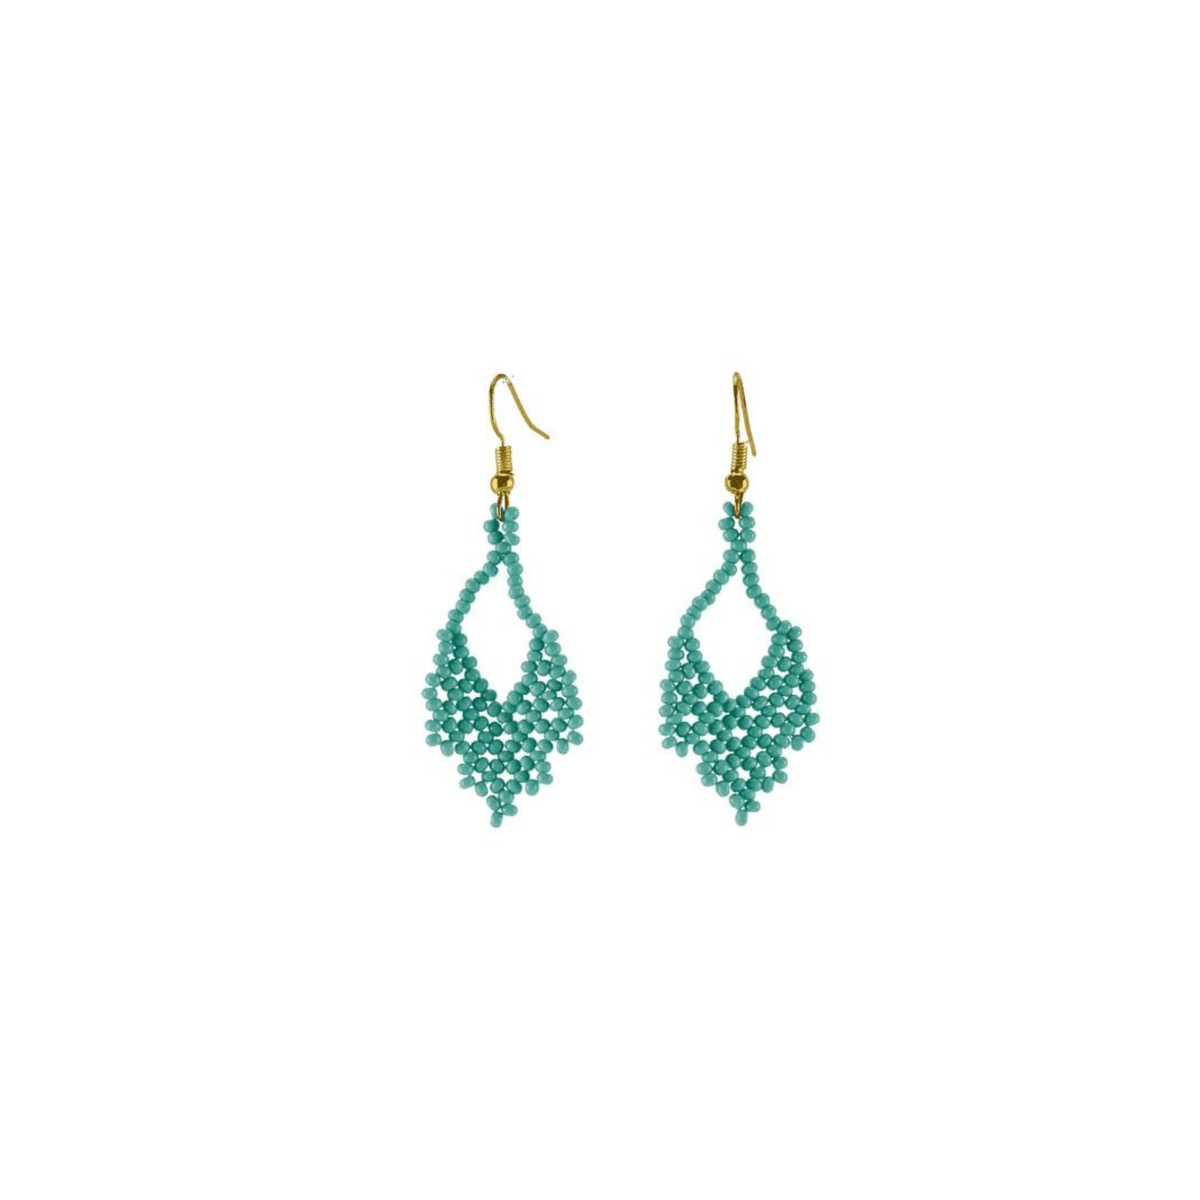 Chiapas Earrings in Turquoise - Josephine Alexander Collective